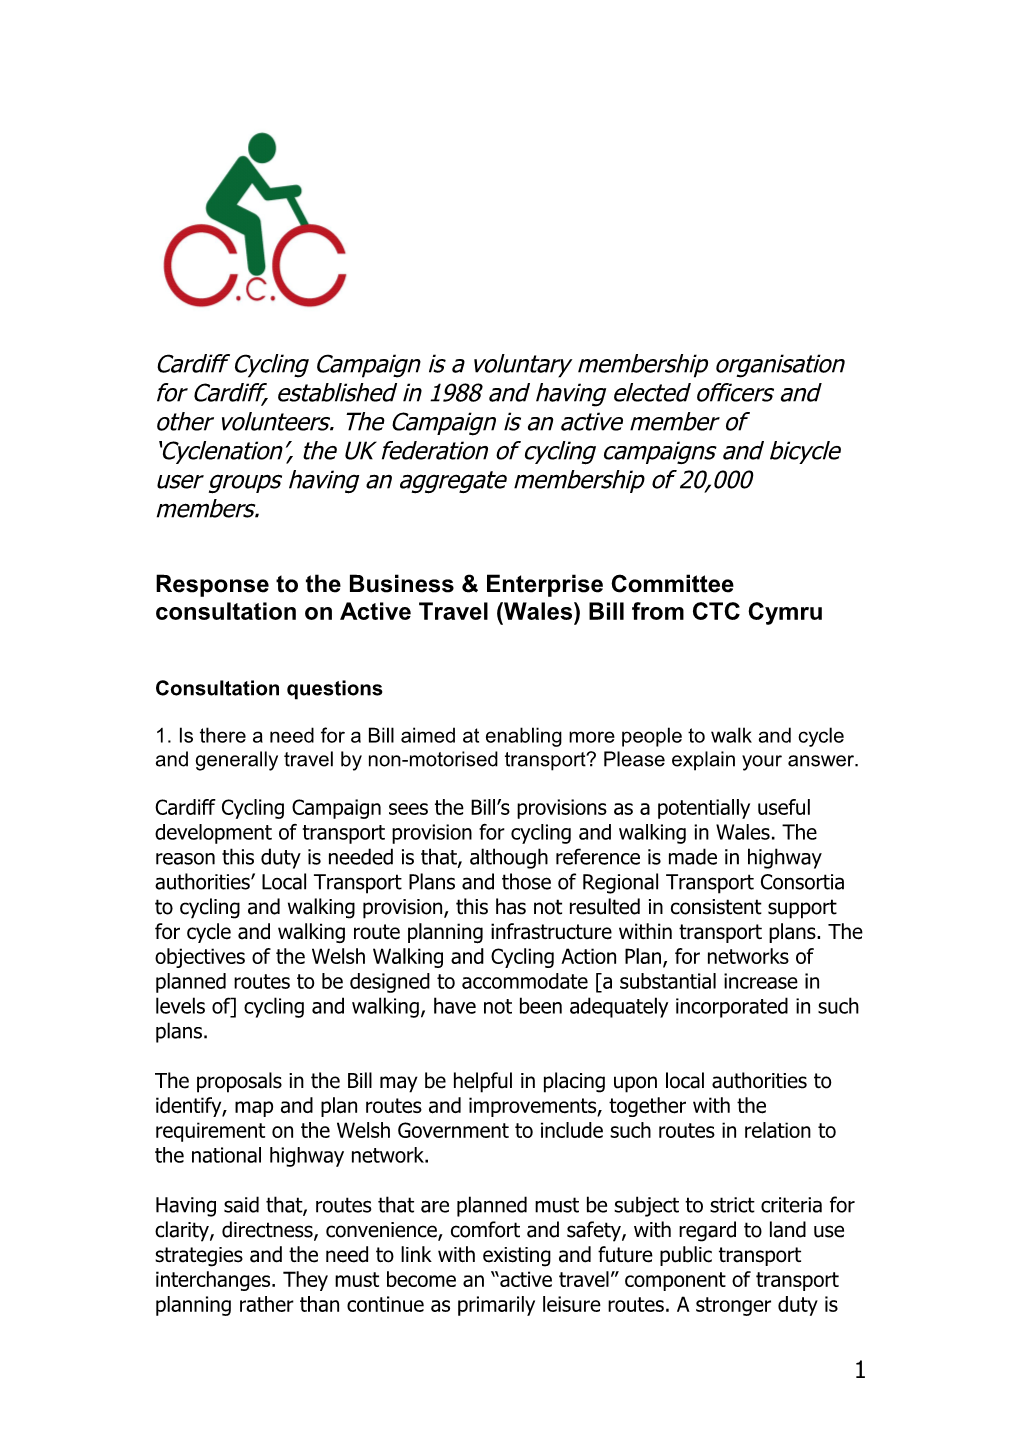 Response to the Business & Enterprise Committee Consultation on Active Travel (Wales)